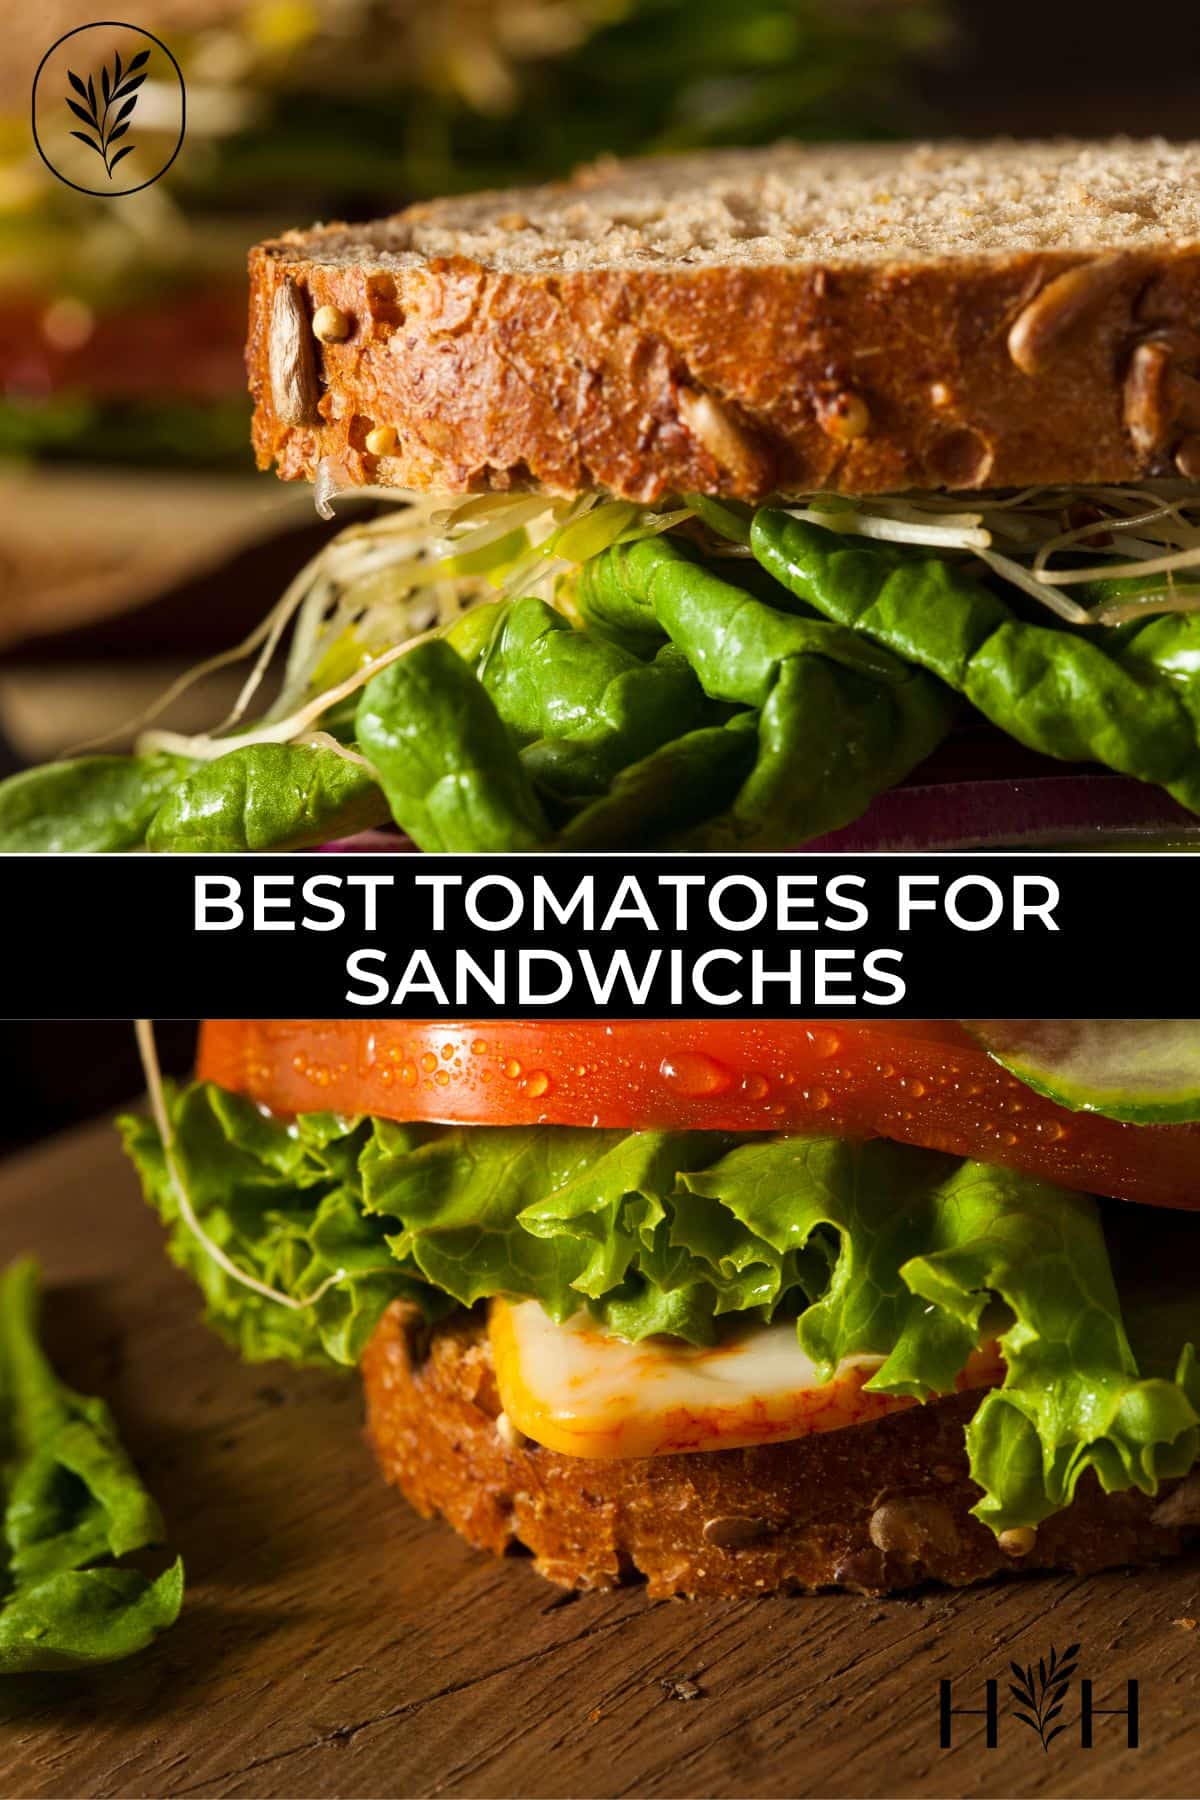 Best tomatoes for sandwiches via @home4theharvest